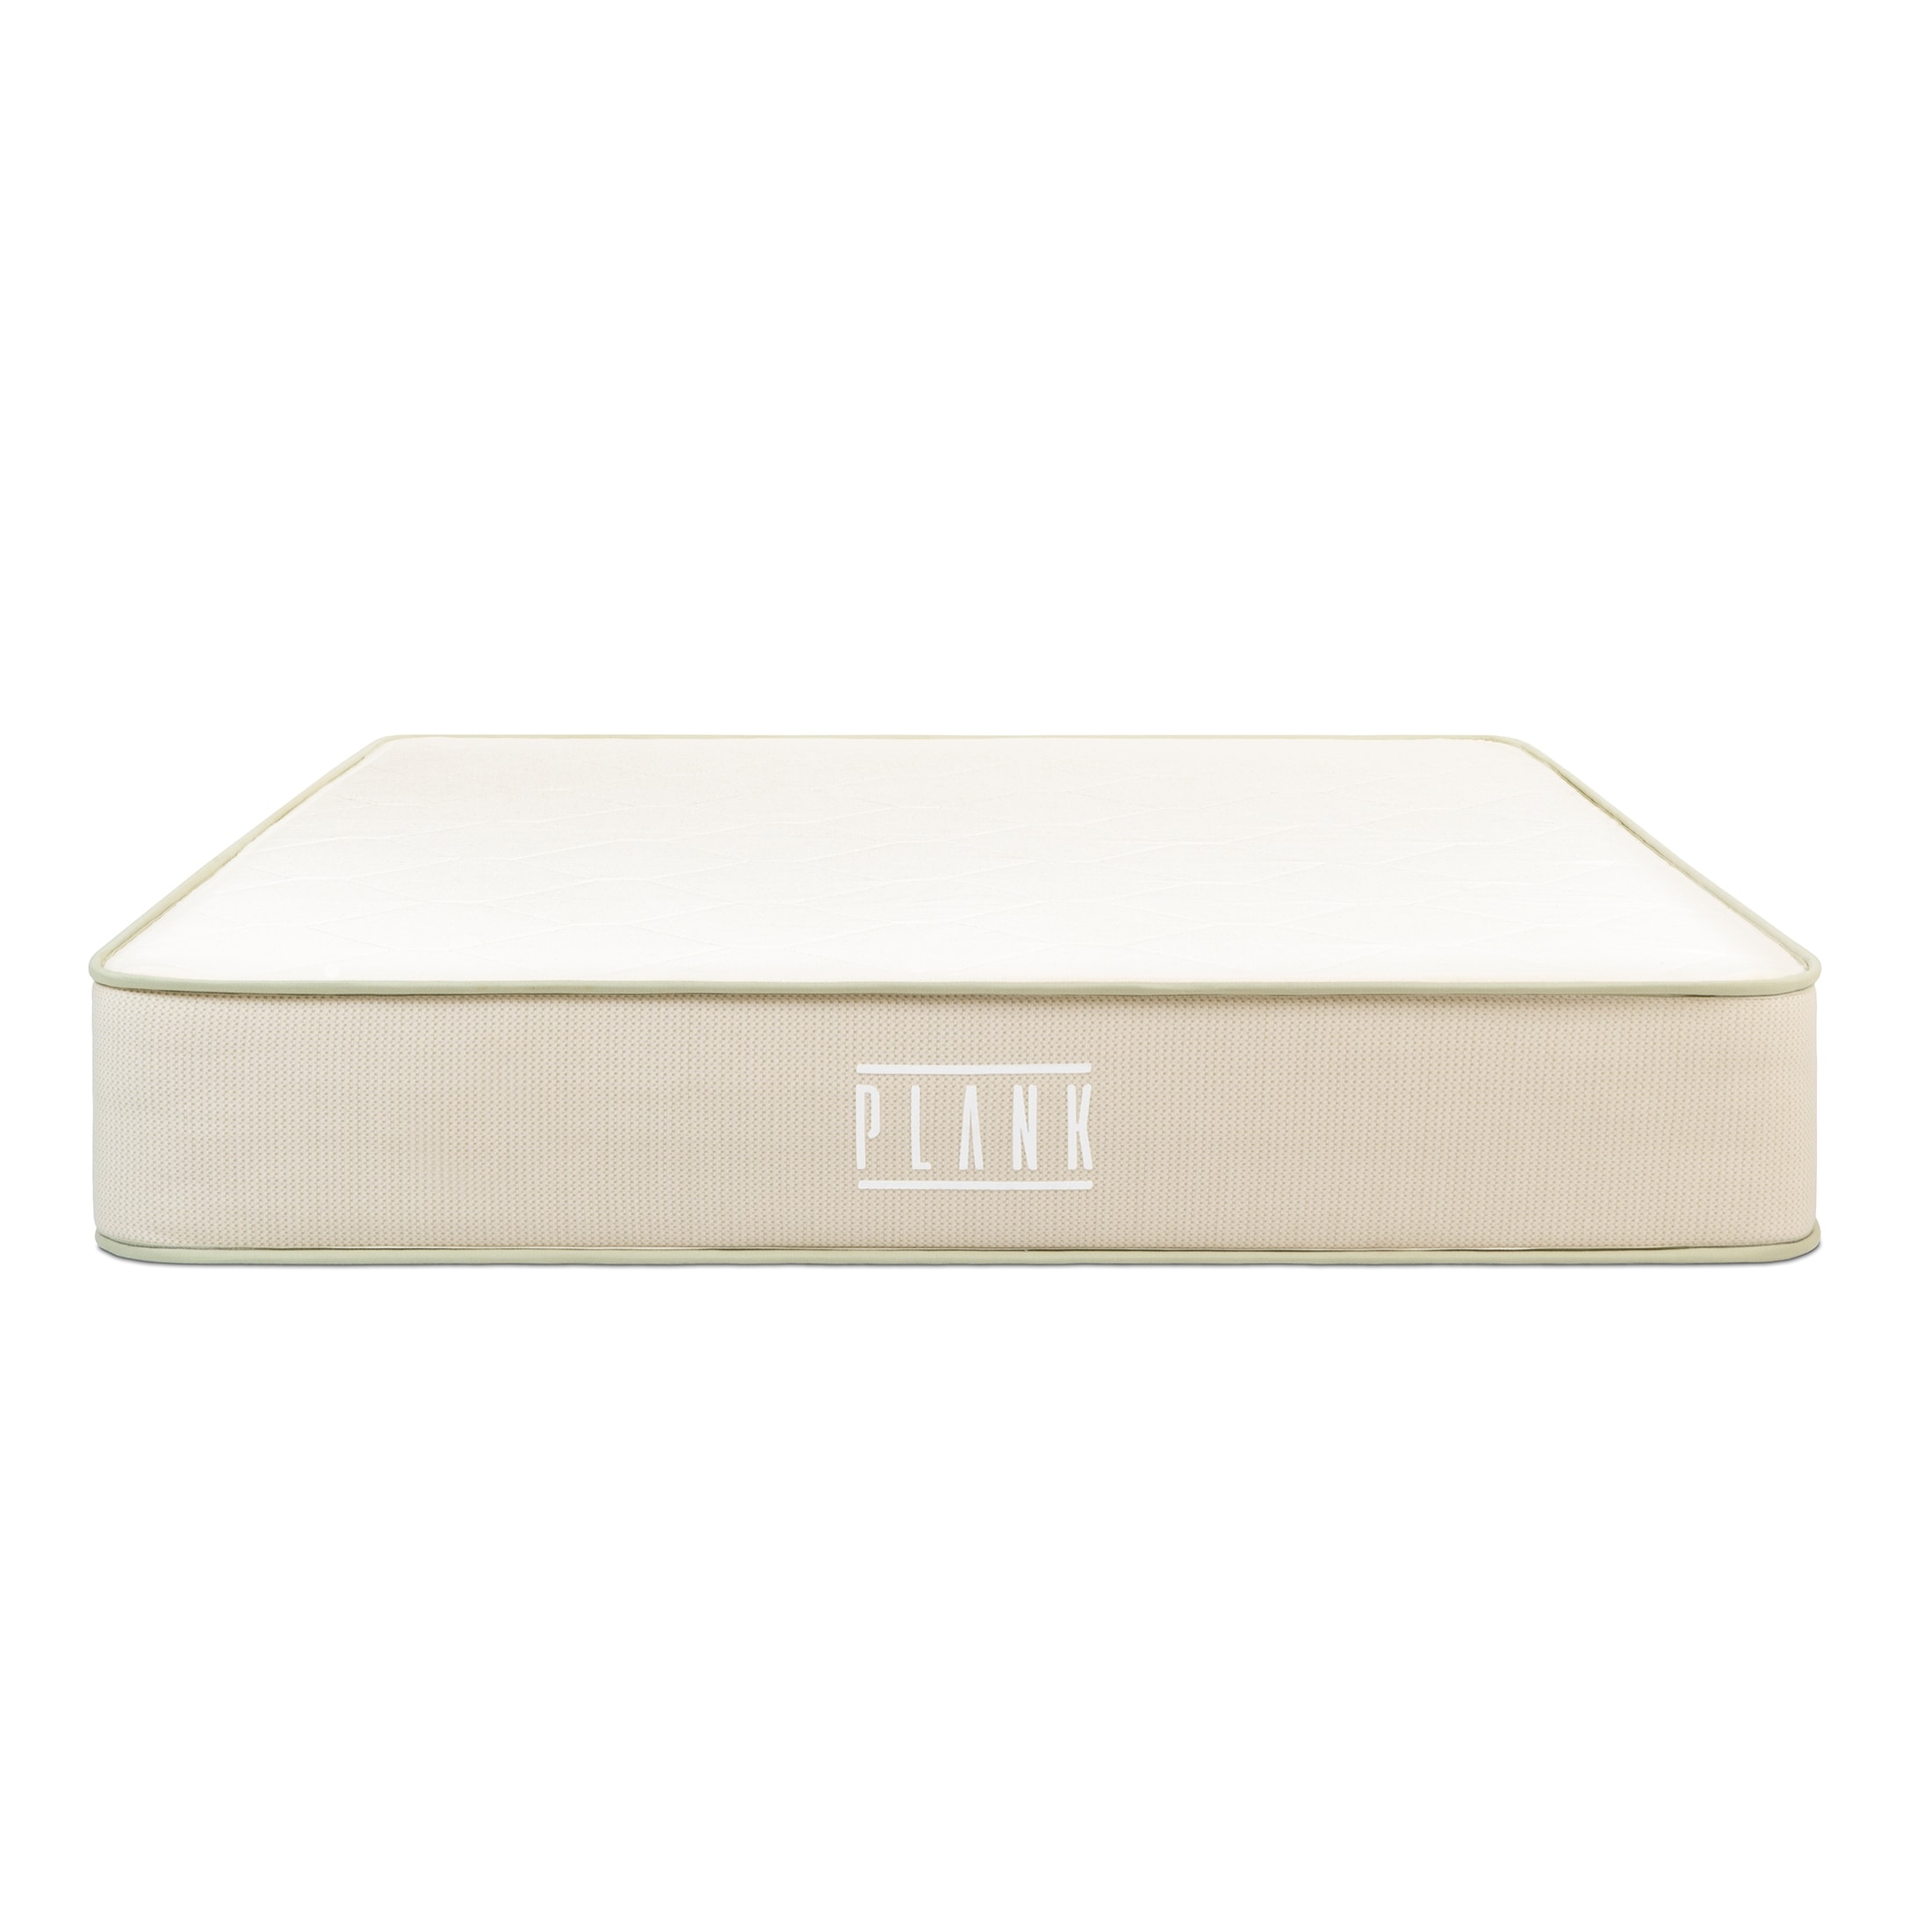  Brooklyn Bedding Plank 13 Luxe Two Sided Firm/Ultra Firm  Mattress, King : Home & Kitchen